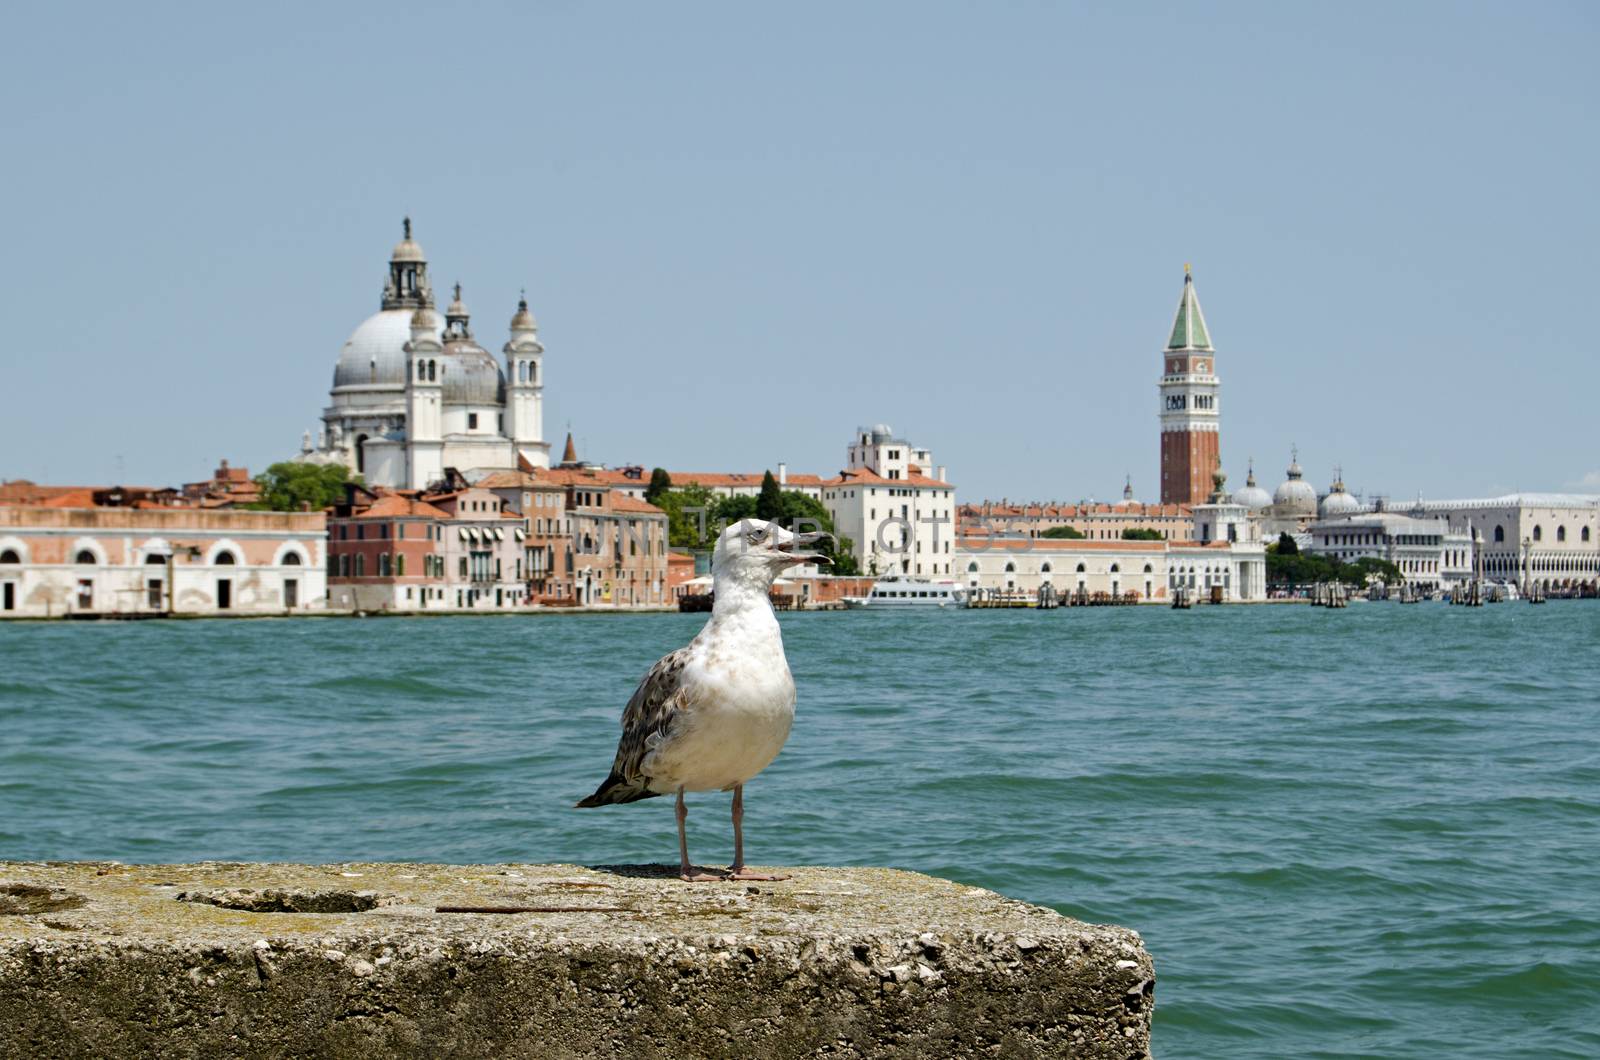 Herring Gull and Venice by BasPhoto